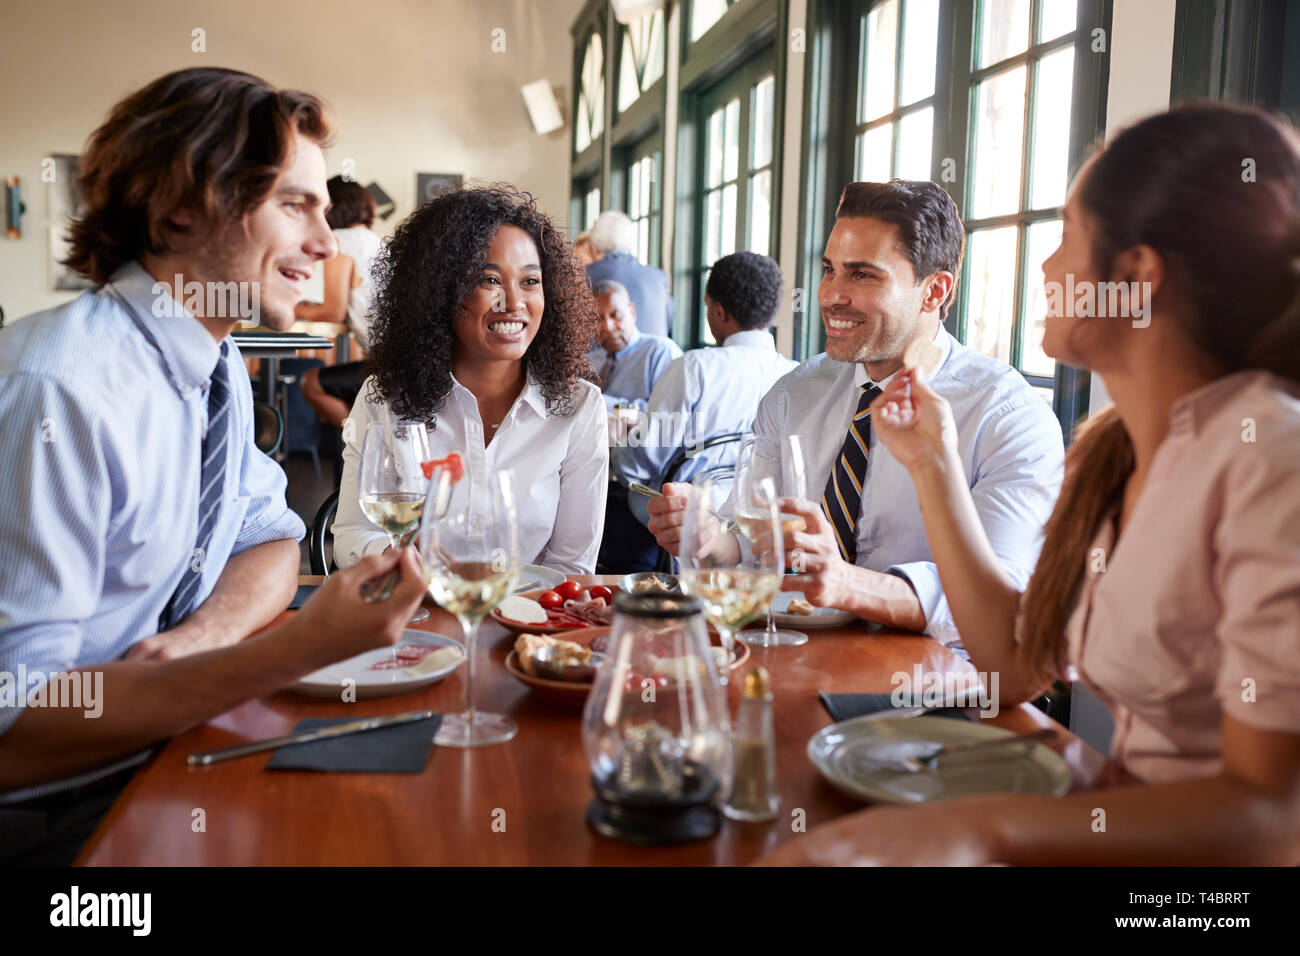 Business Colleagues Sitting Around Restaurant Table Enjoying Meal Together Stock Photo